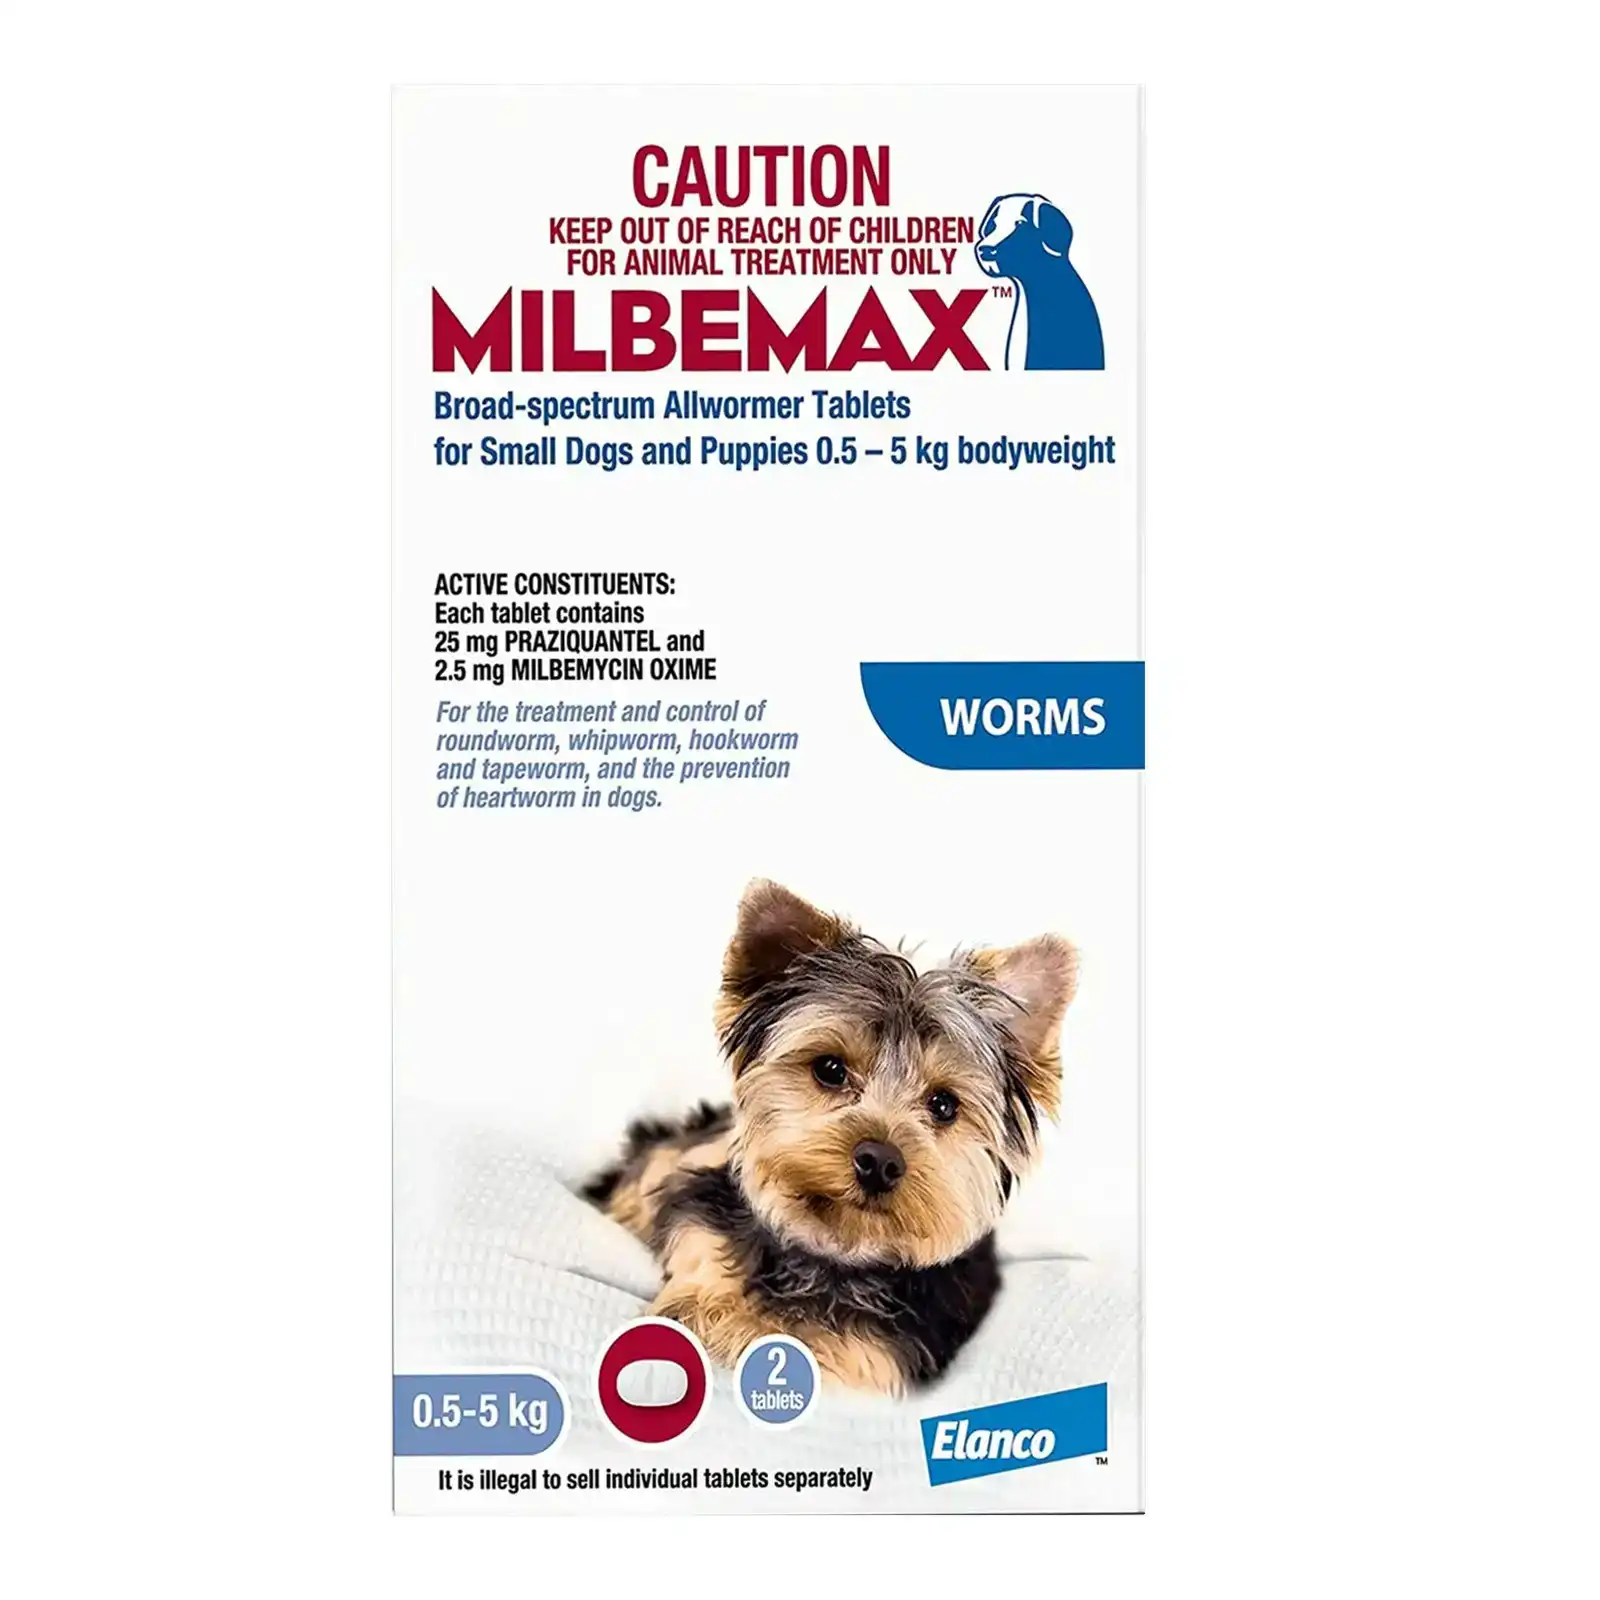 Milbemax Allwormer Tablets For Small Dogs 0.5 To 5 Kg 4 Tablets